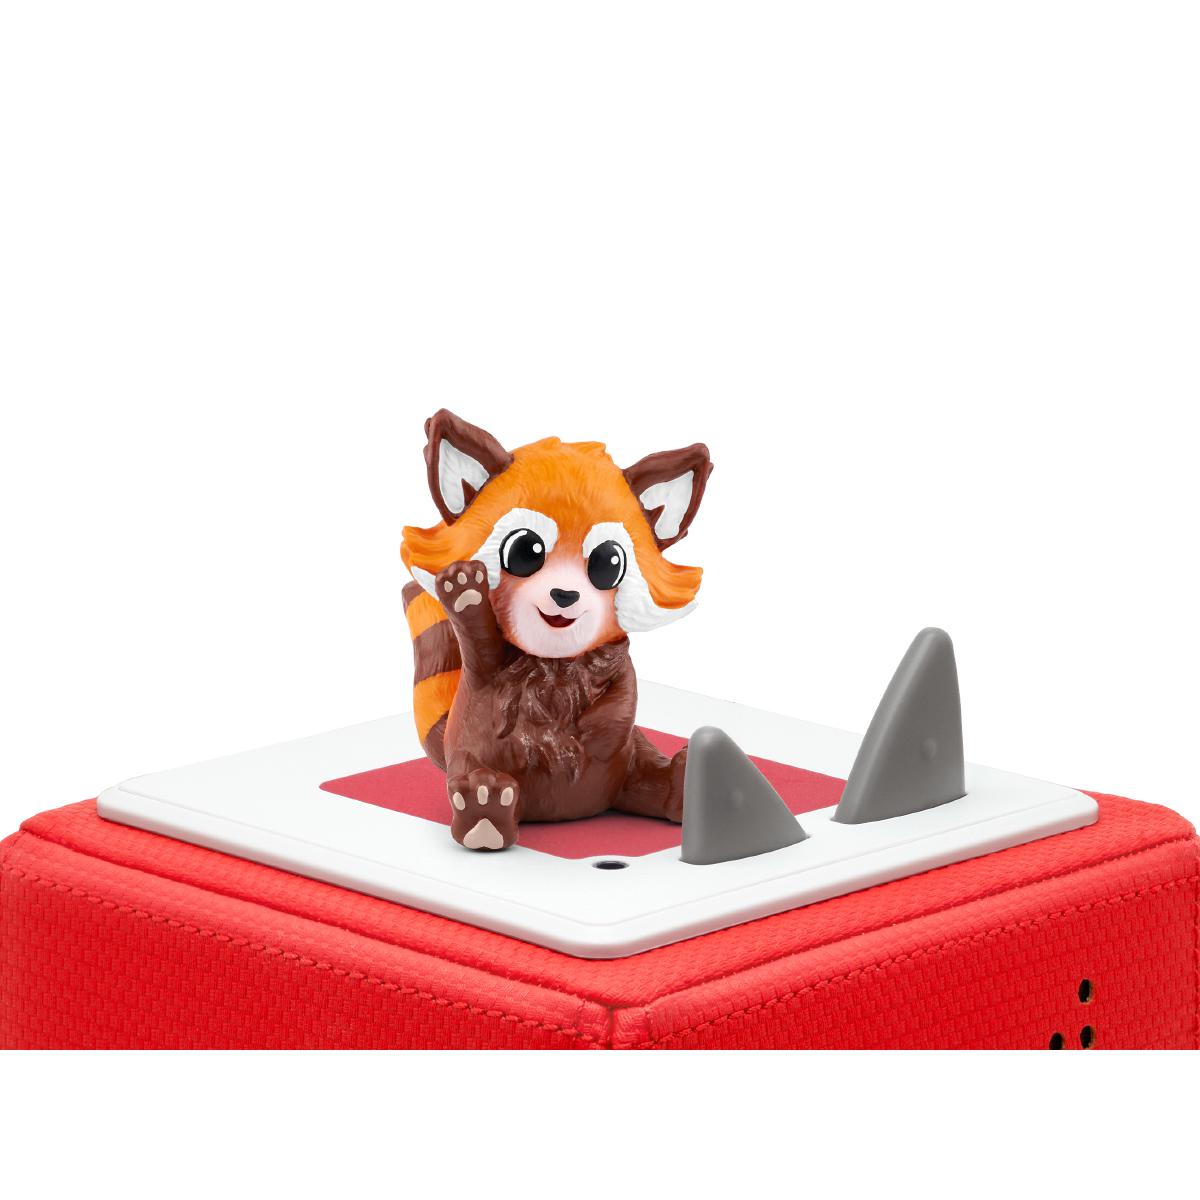 Conservation Crew - Red Panda Tonie Figure-Audioplayer Character-Tonies-Yes Bebe